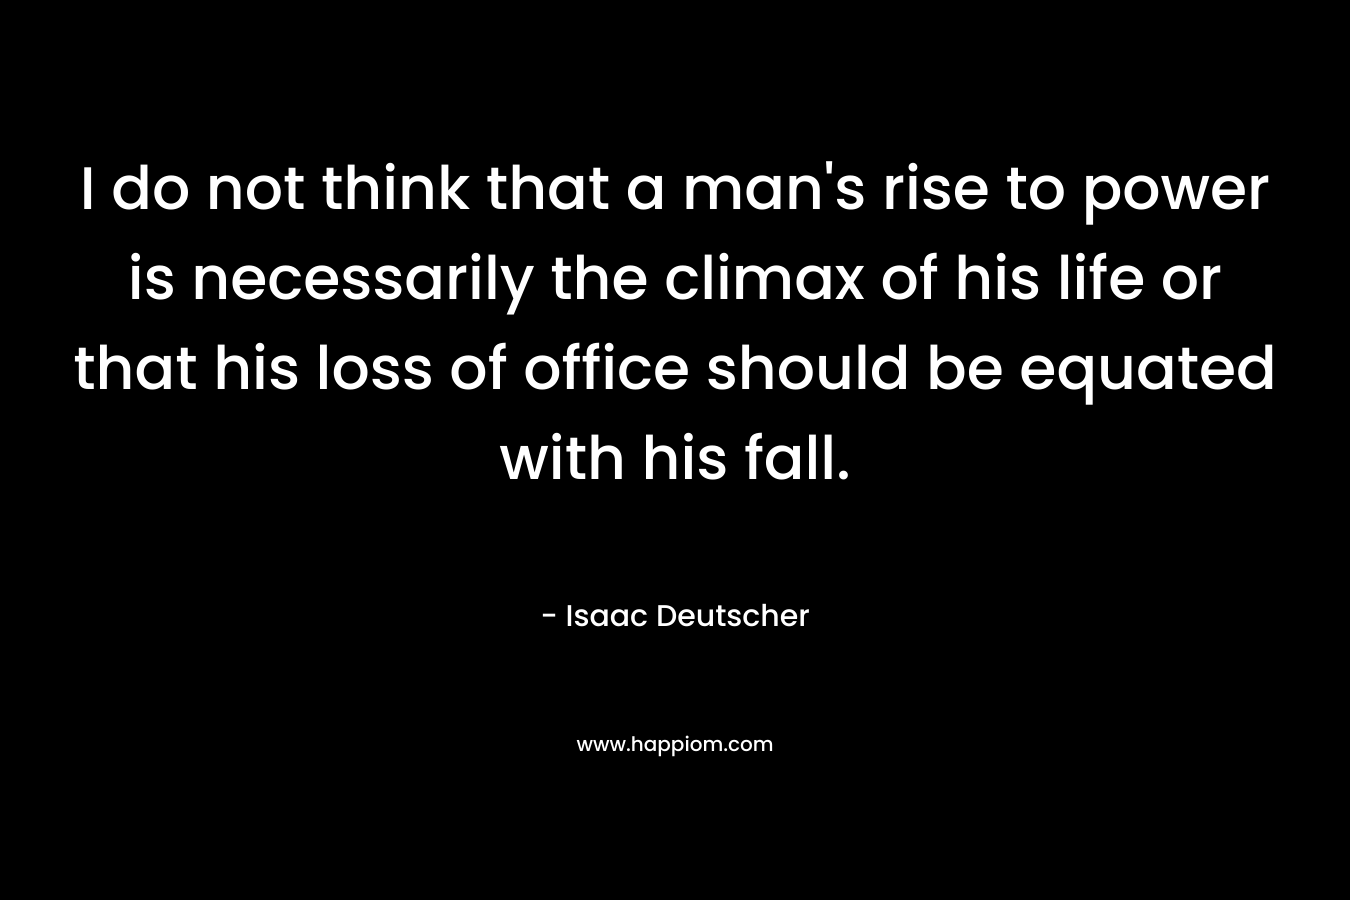 I do not think that a man's rise to power is necessarily the climax of his life or that his loss of office should be equated with his fall.